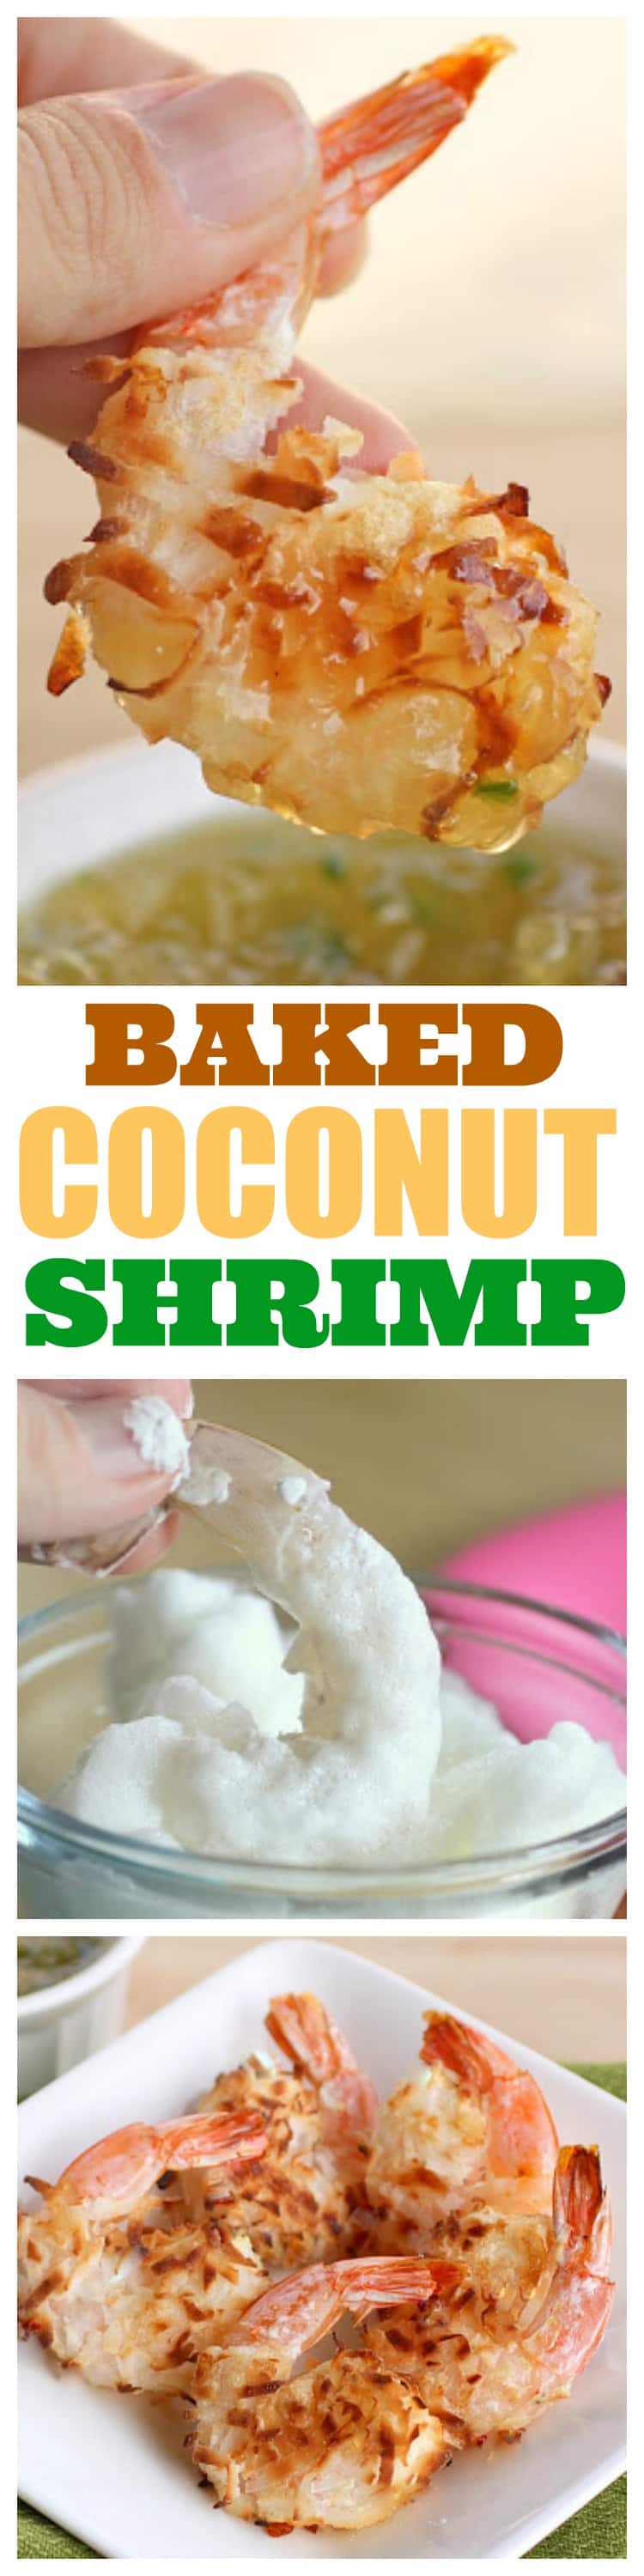 Baked Coconut Shrimp with Pineapple Dipping Sauce - the-girl-who-ate-everything.com